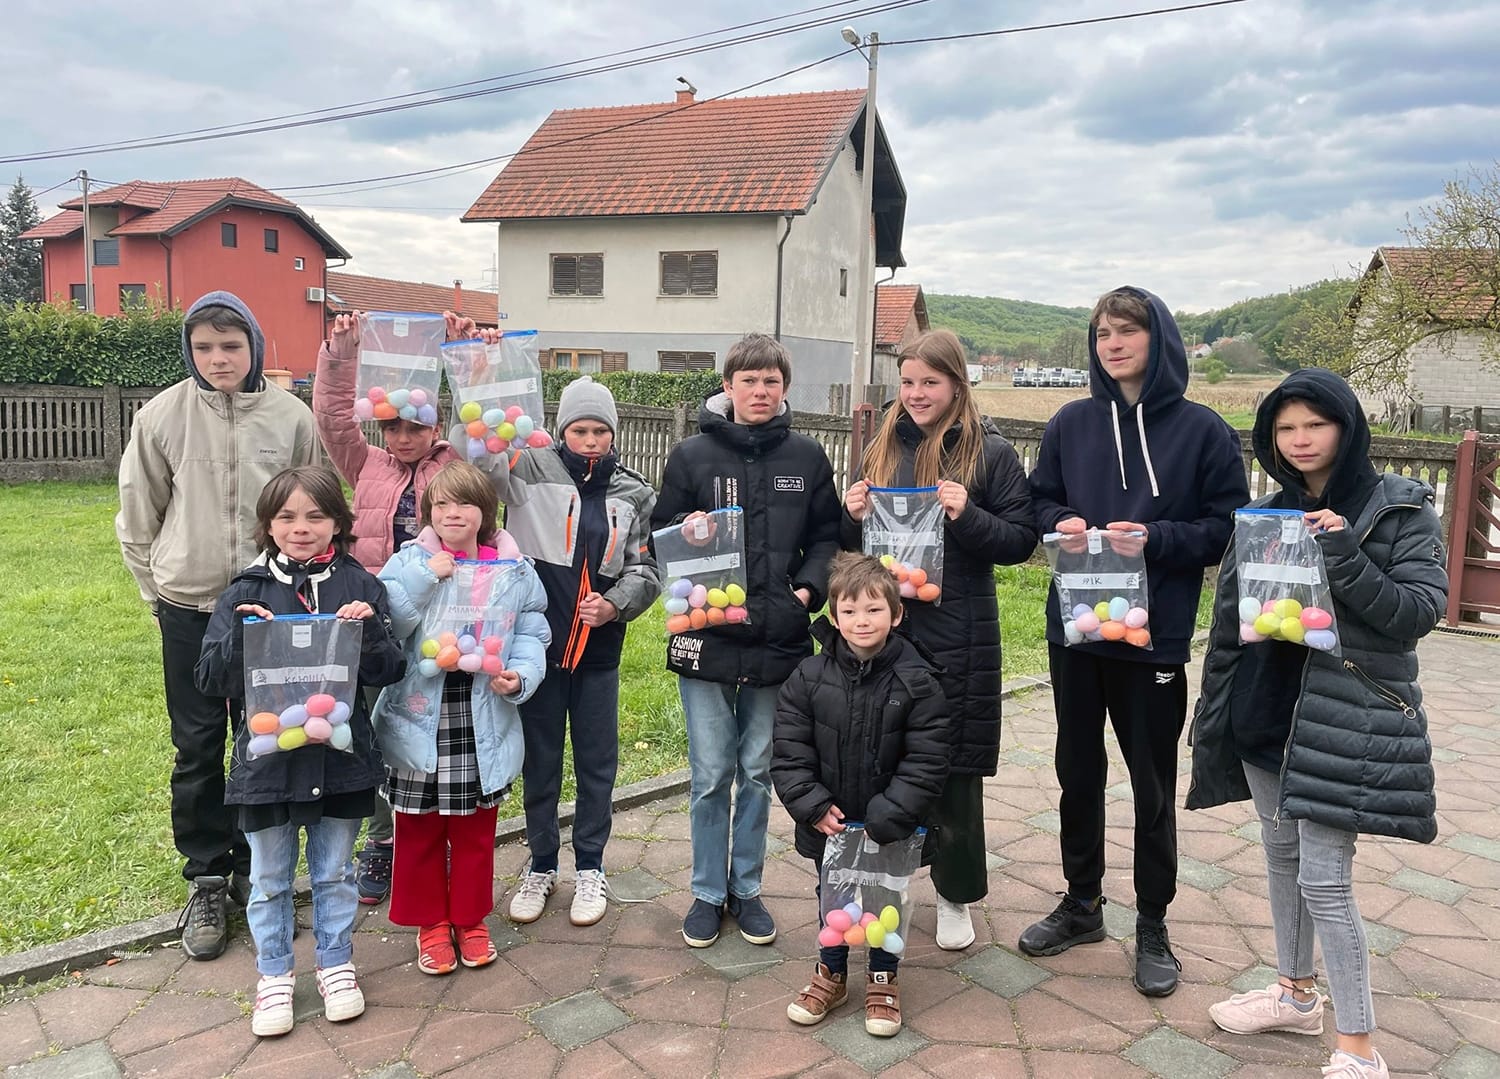 These 10 children were living at a rescue shelter in Ukraine operated by Jeremiah’s Hope, a ministry founded by ACU alumnus Andrew Kelly. When war broke out, Kelly and his wife engineered their evacuation. The children arrived in Croatia on a Wednesday and their first Sunday in Zagreb was Easter. 